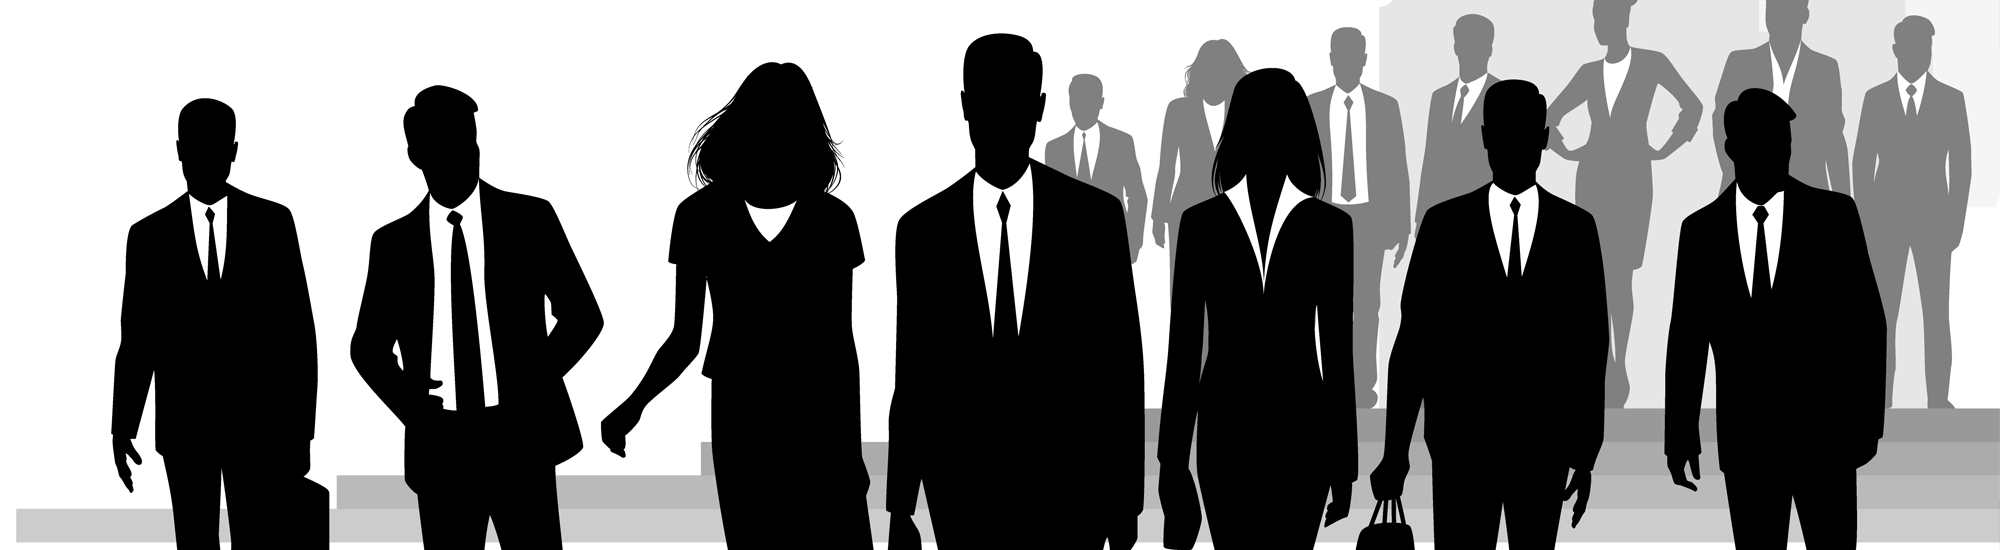 Silhouette of Business Professionals